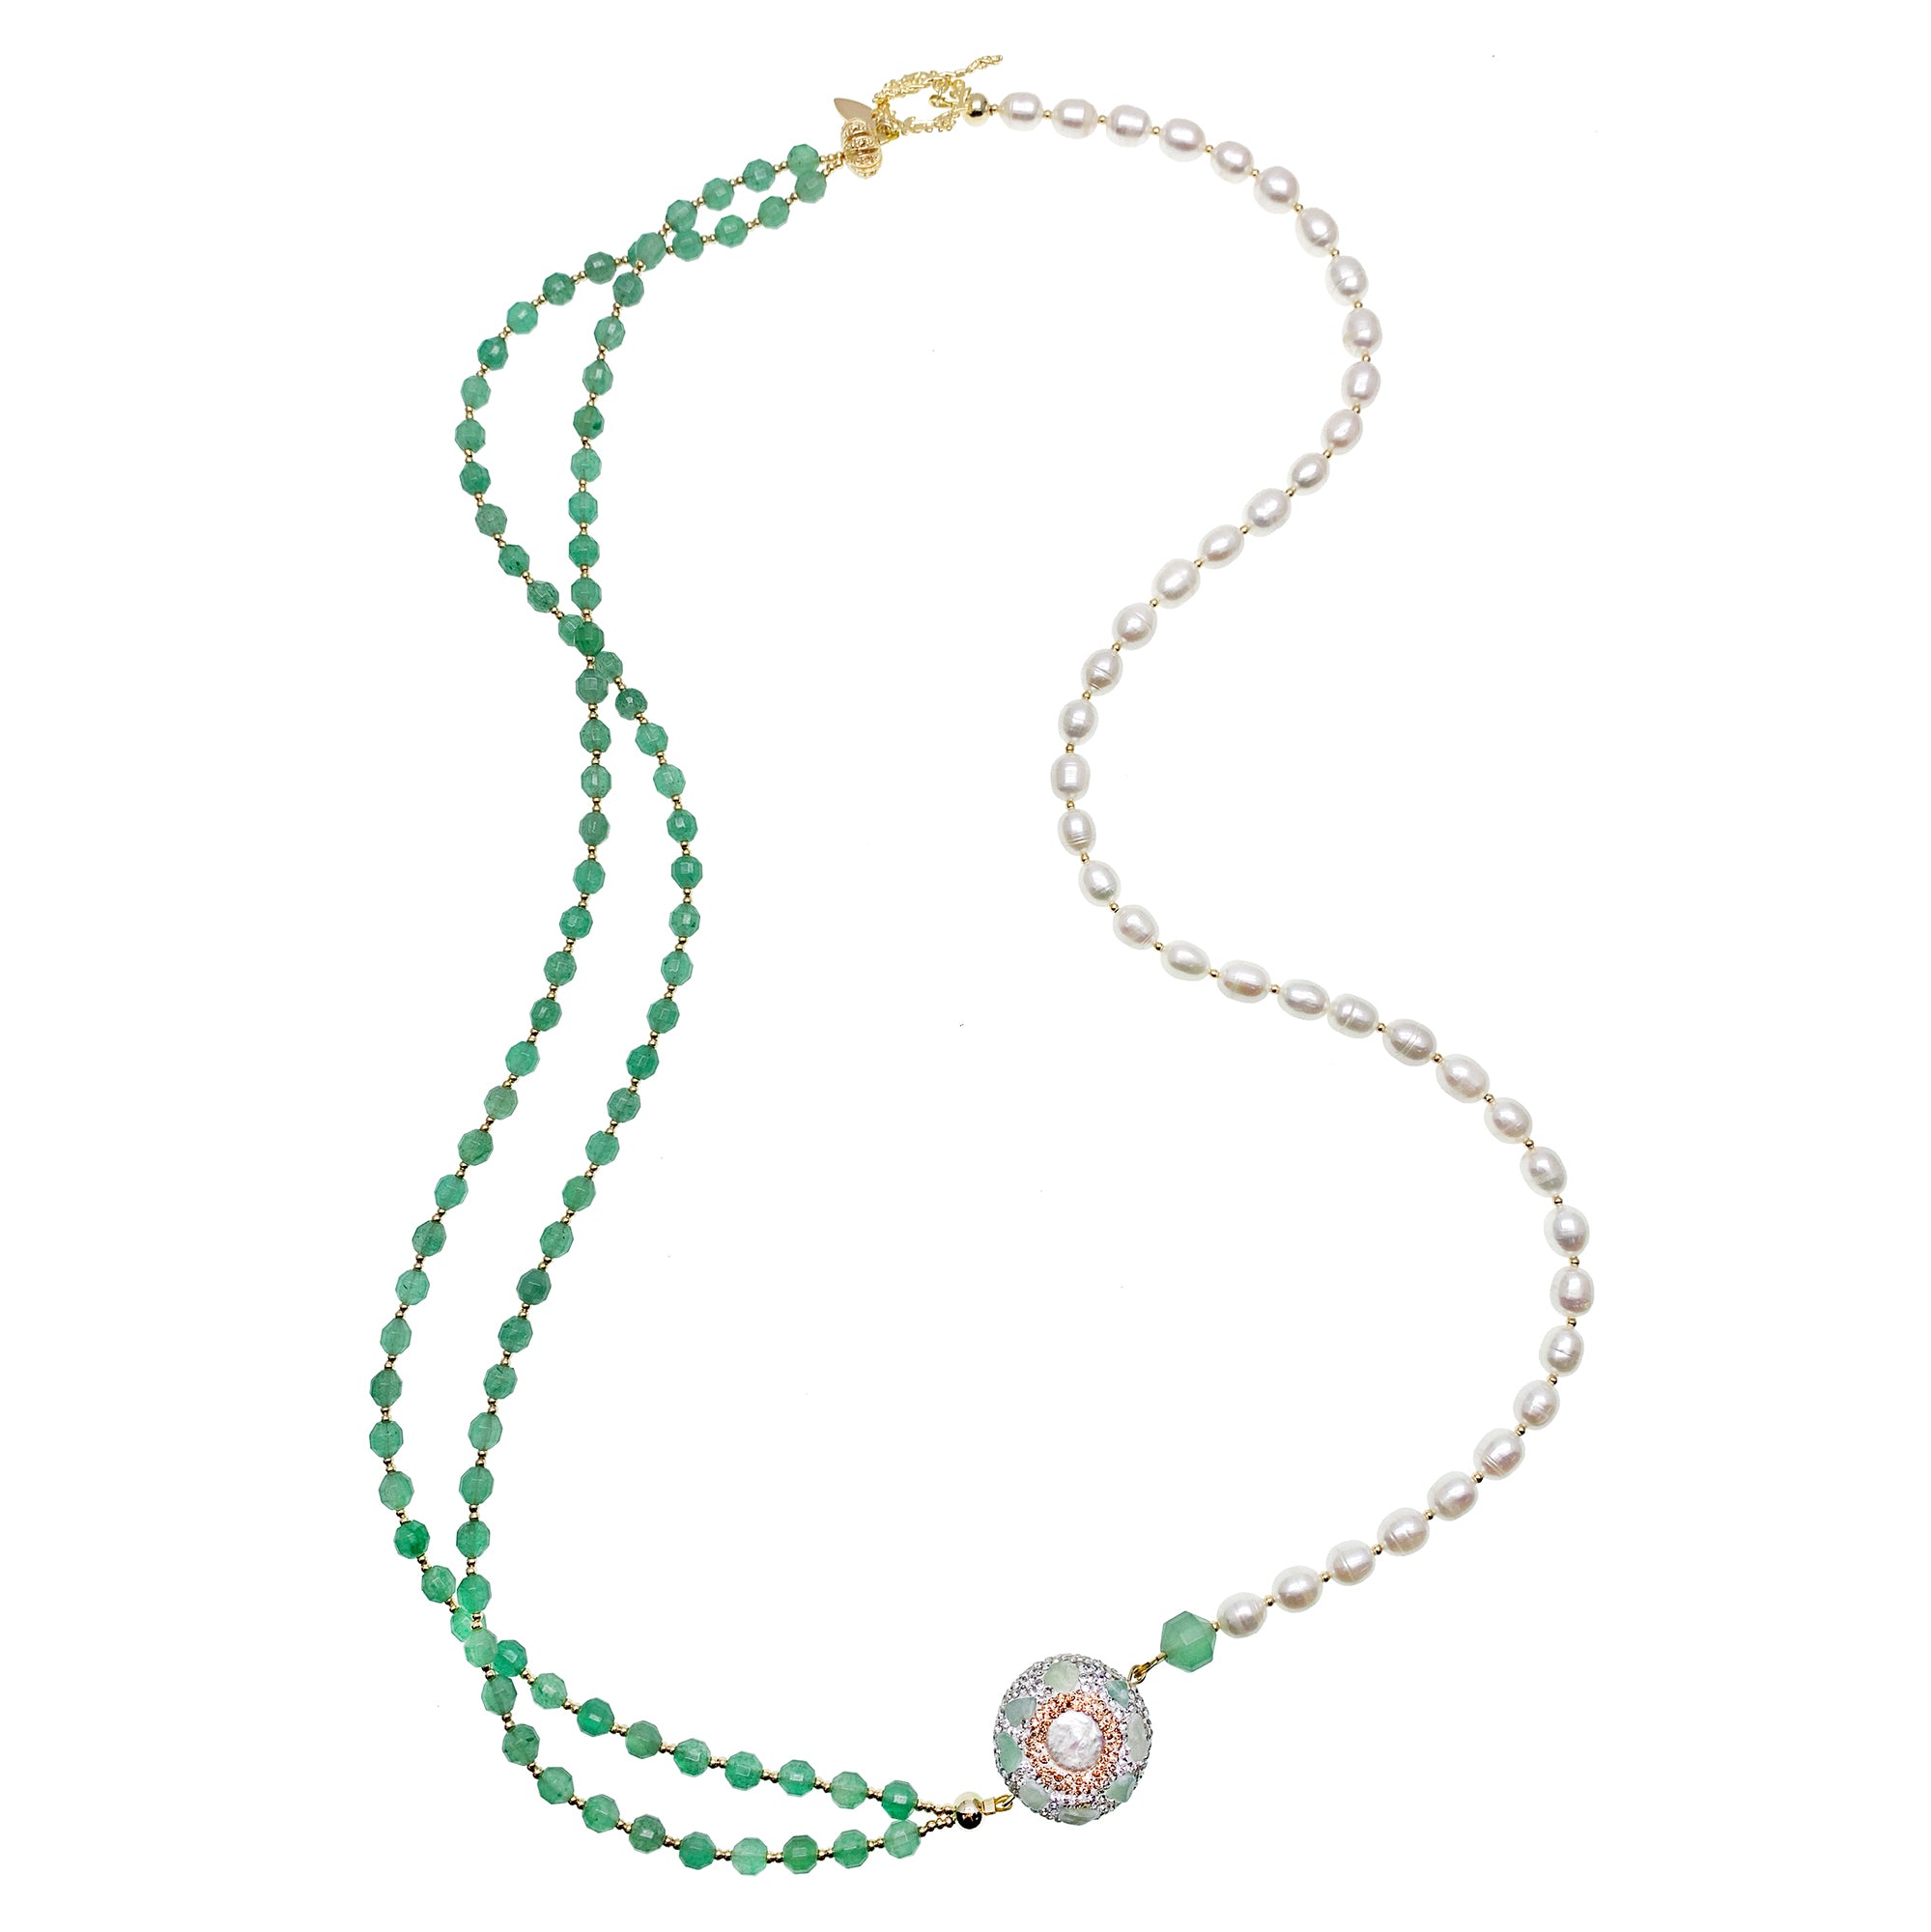 Farra Long Green Aventurine and Pearl Charm Necklace - shop idPearl